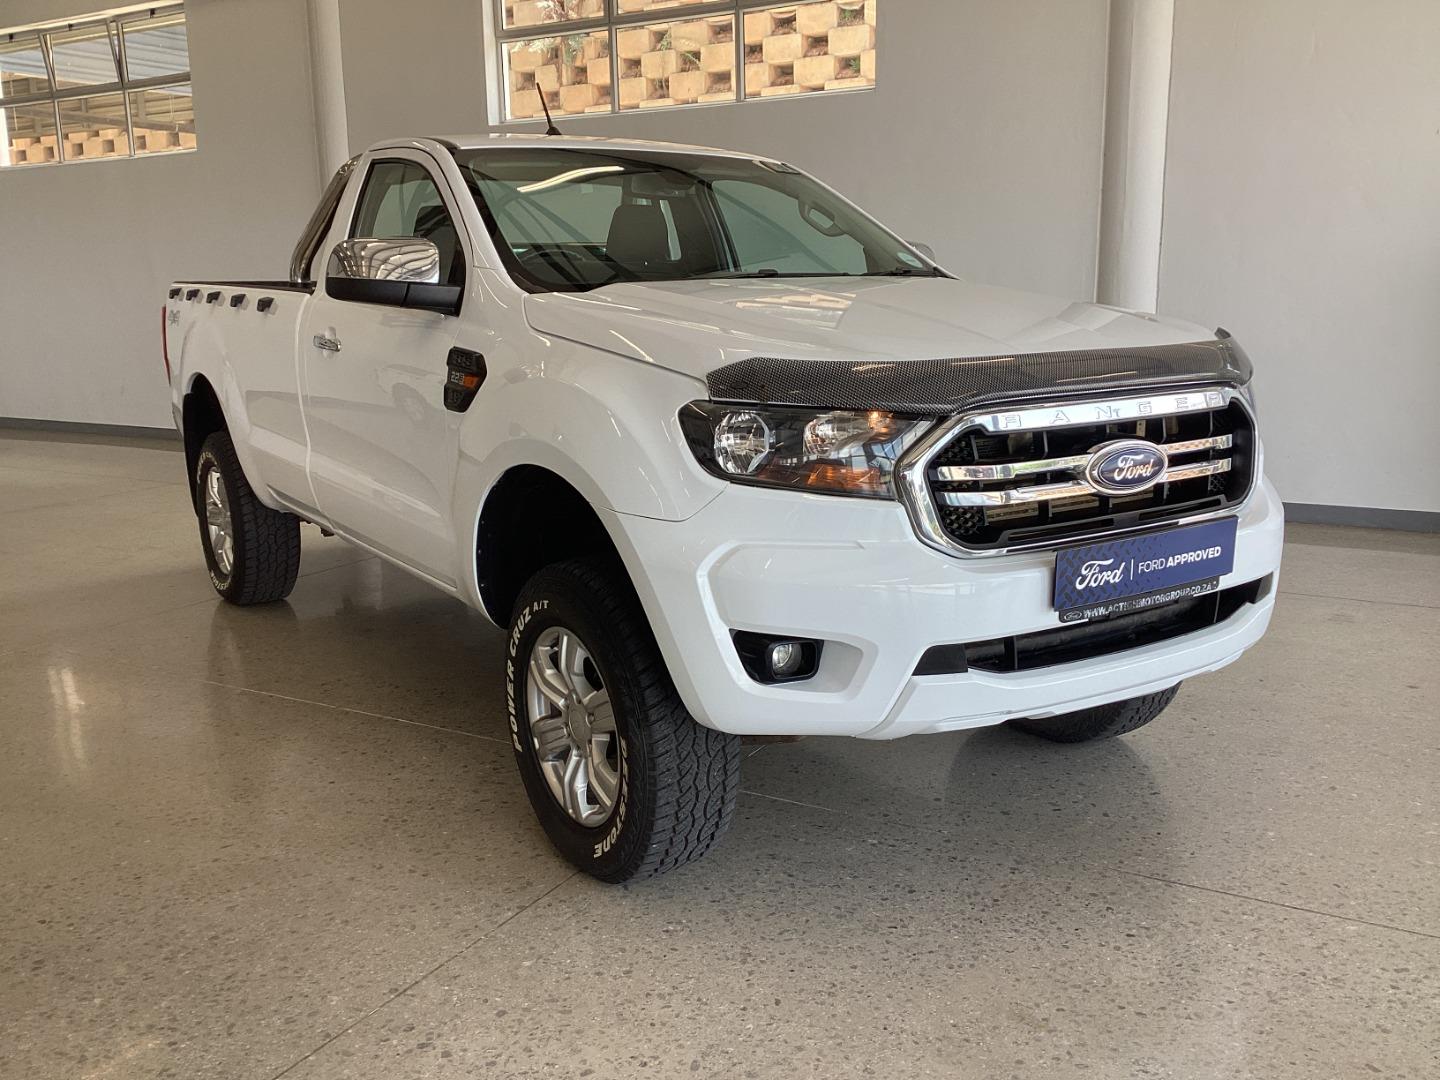 2019 Ford Ranger 2.2TDCi Double Cab 4x4 XLS Auto For Sale